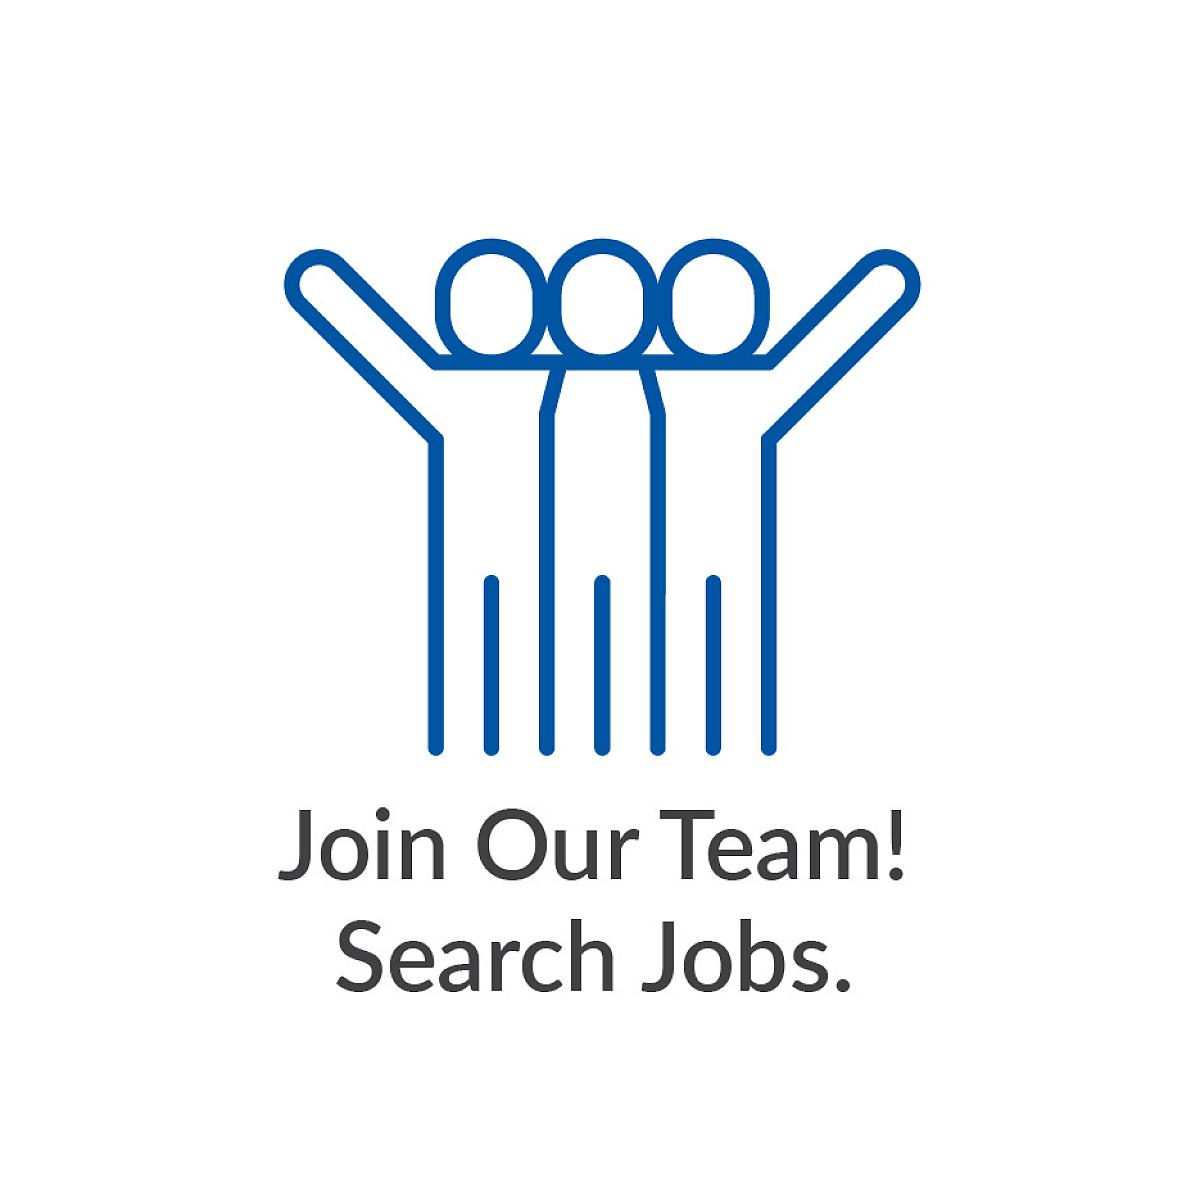 Join Our Team! Search Jobs.